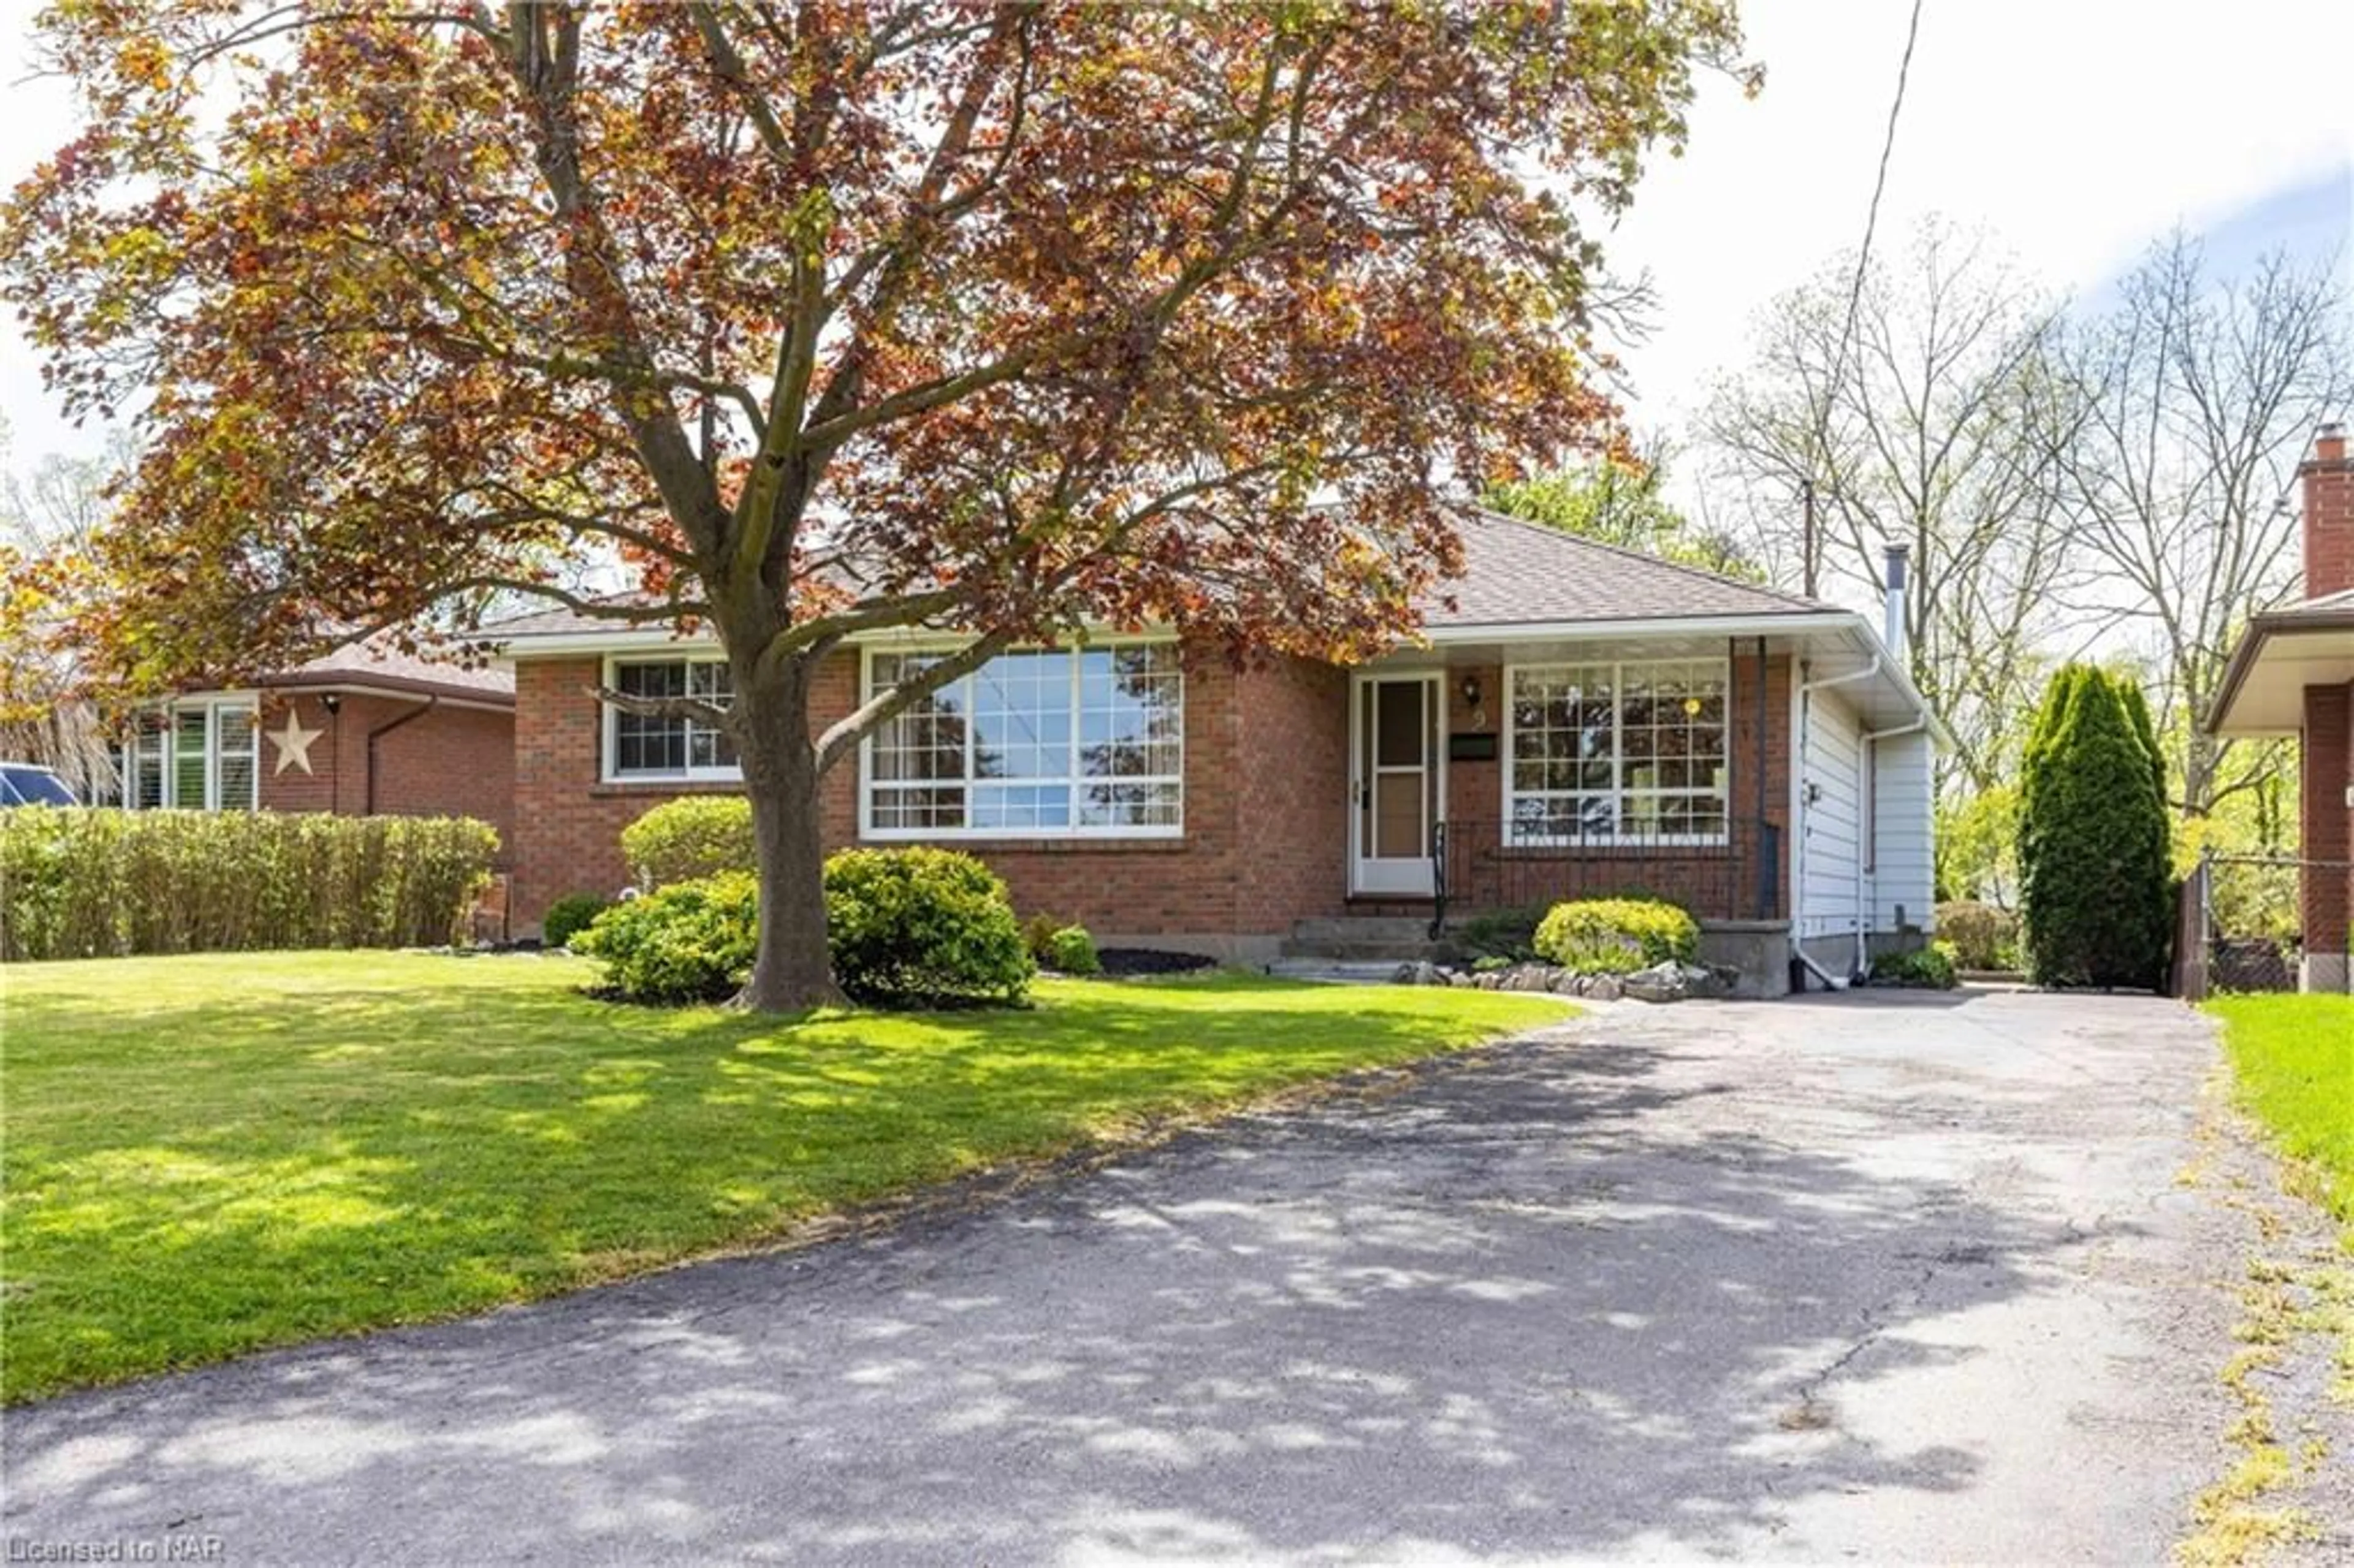 Home with brick exterior material for 9 Hardwood Grove, St. Catharines Ontario L2P 1K3